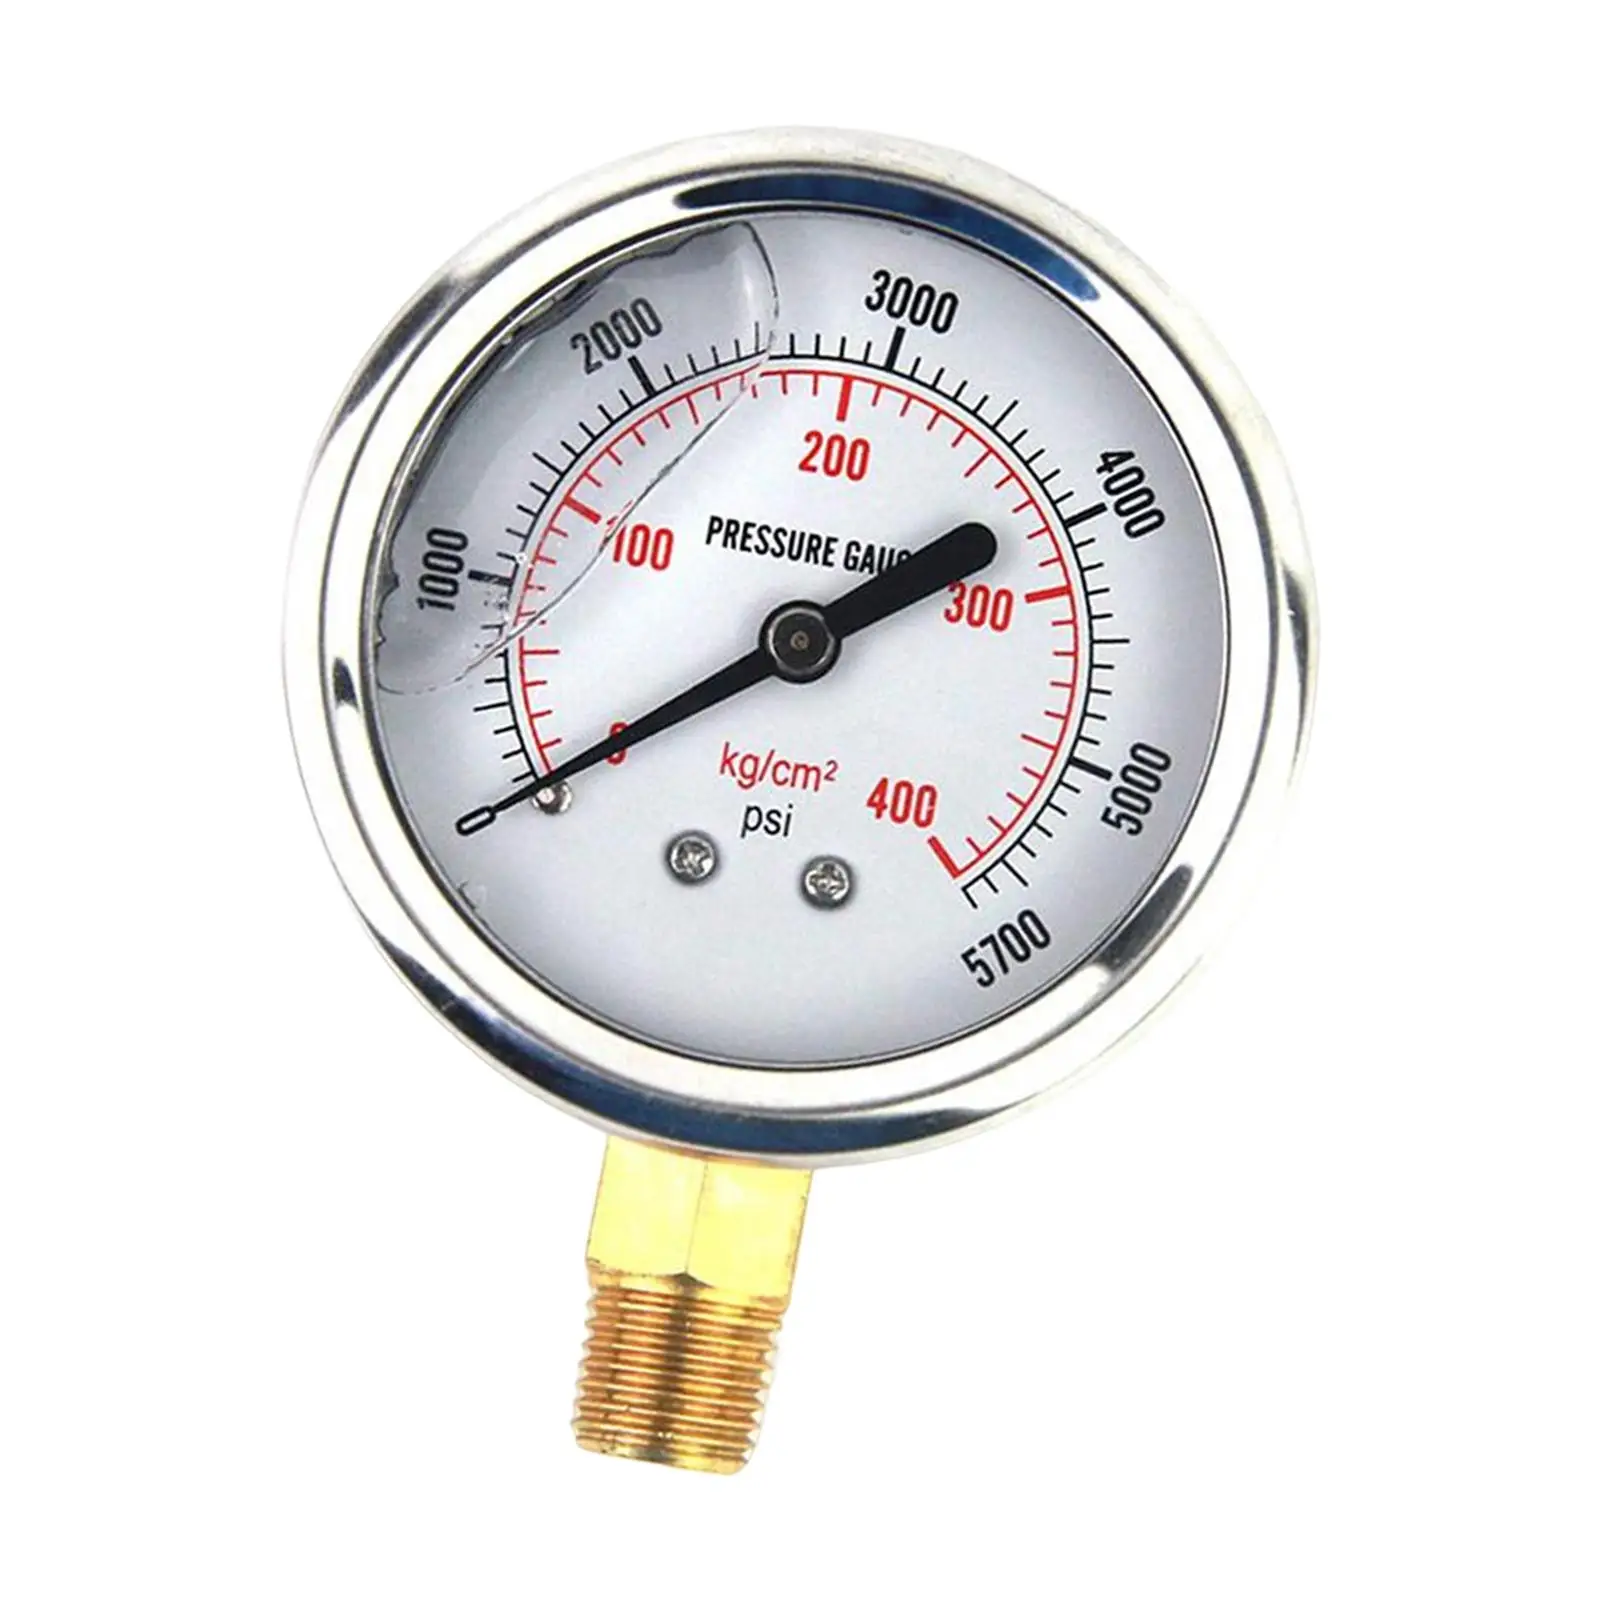 Hydraulic Pressure Gauge Fuel Pressure Vehicle Stainless Steel Case with Brass Wetted Parts